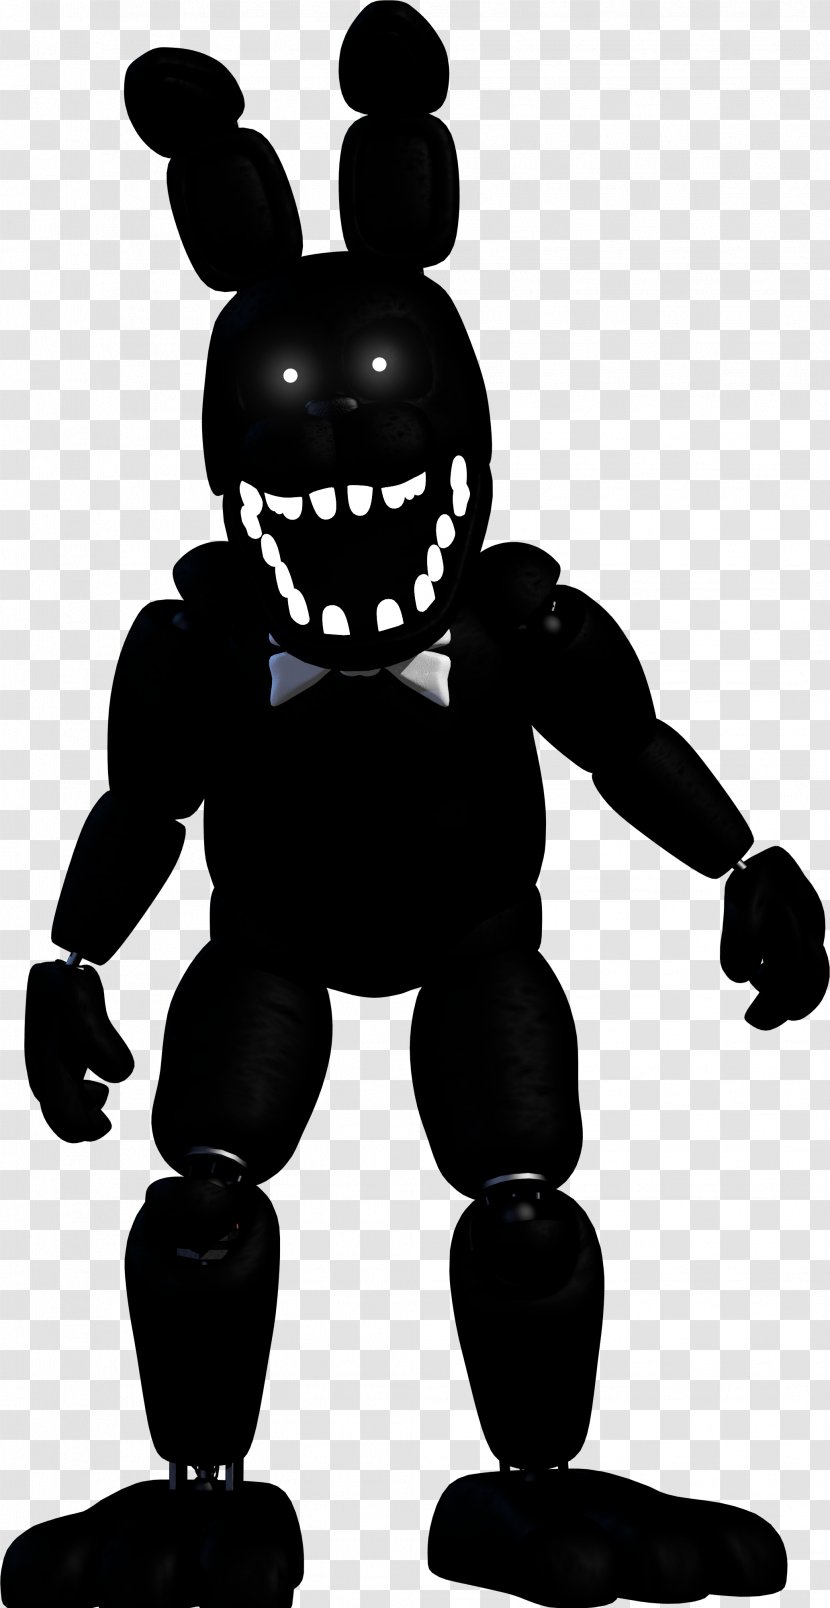 Five Nights At Freddy's DeviantArt Silhouette Clip Art - Jump Scare - Shadow Material Transparent PNG